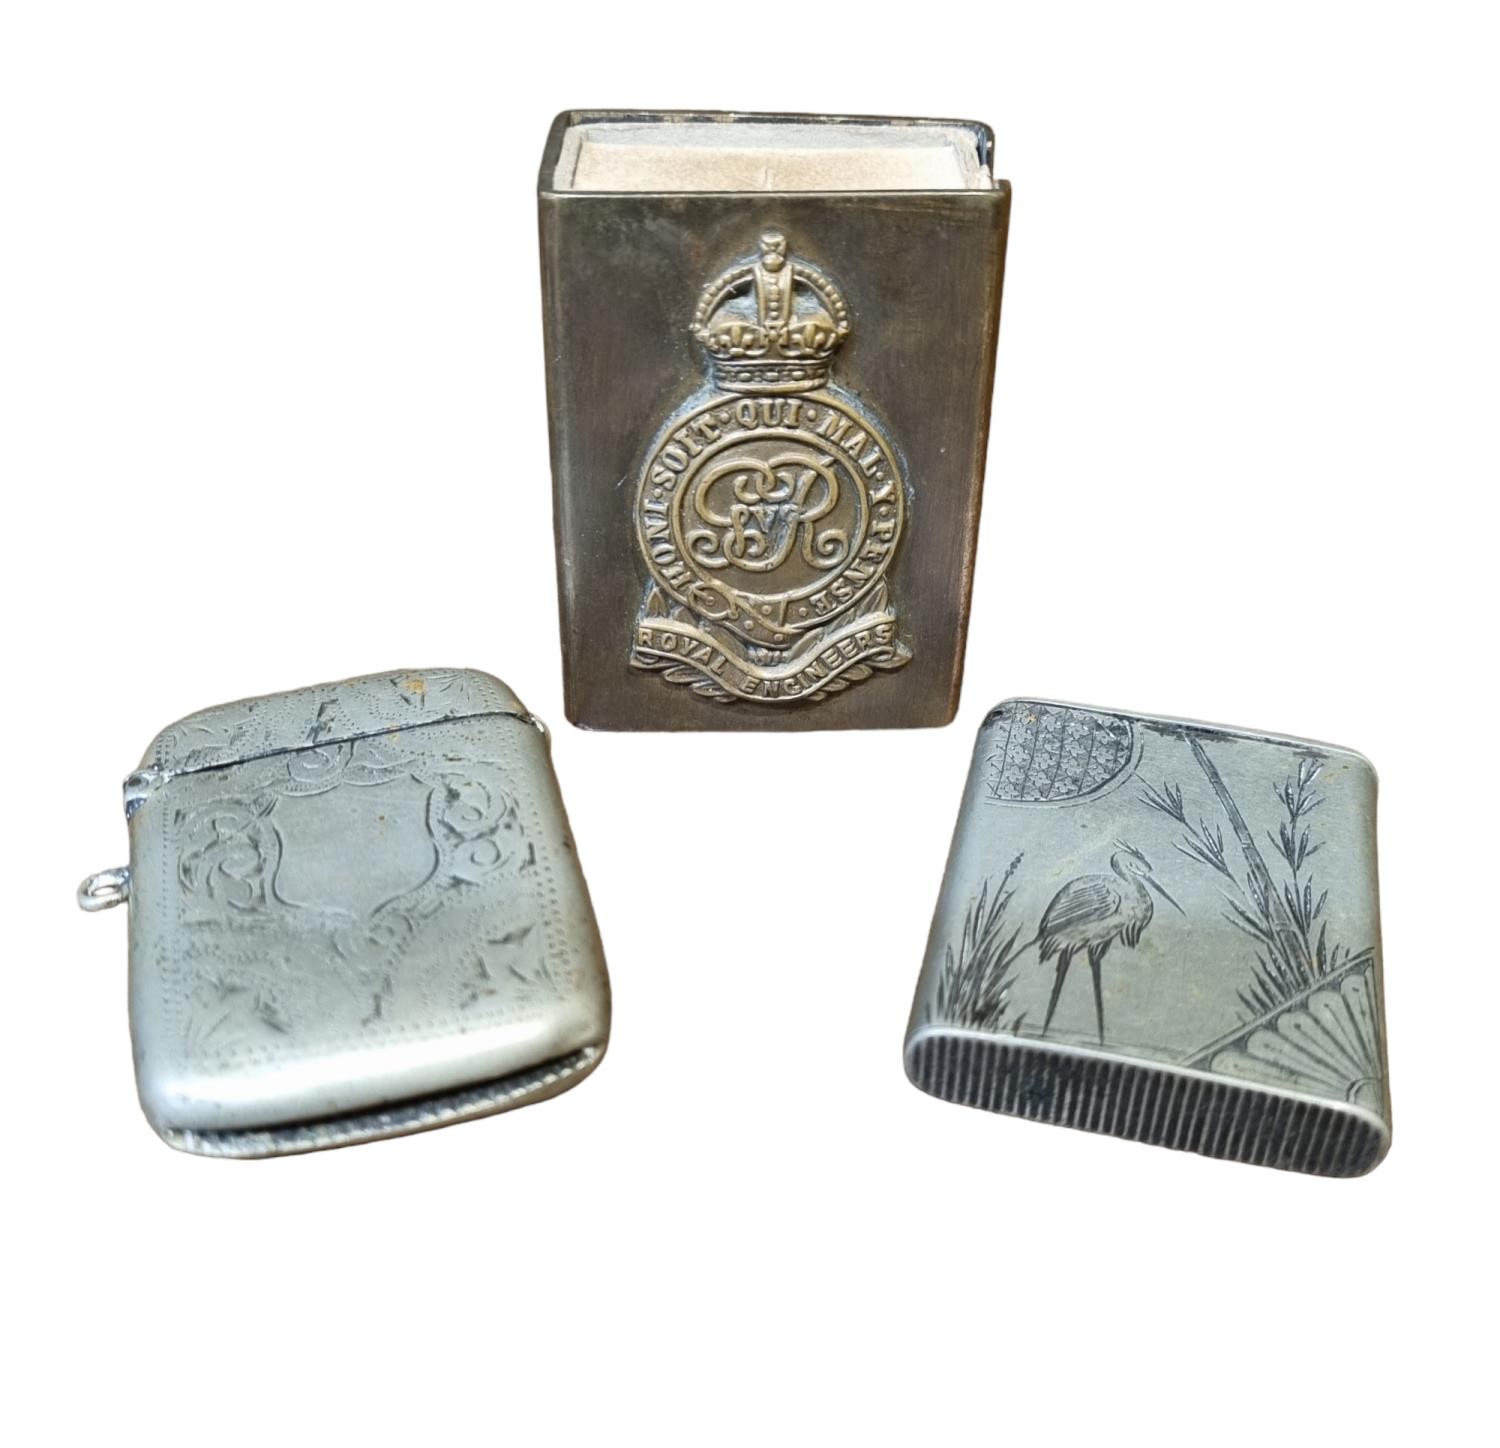 2 x Silver Plated Vesta Cases & Brass Matchbox Holder with Royal Engineers Insignia